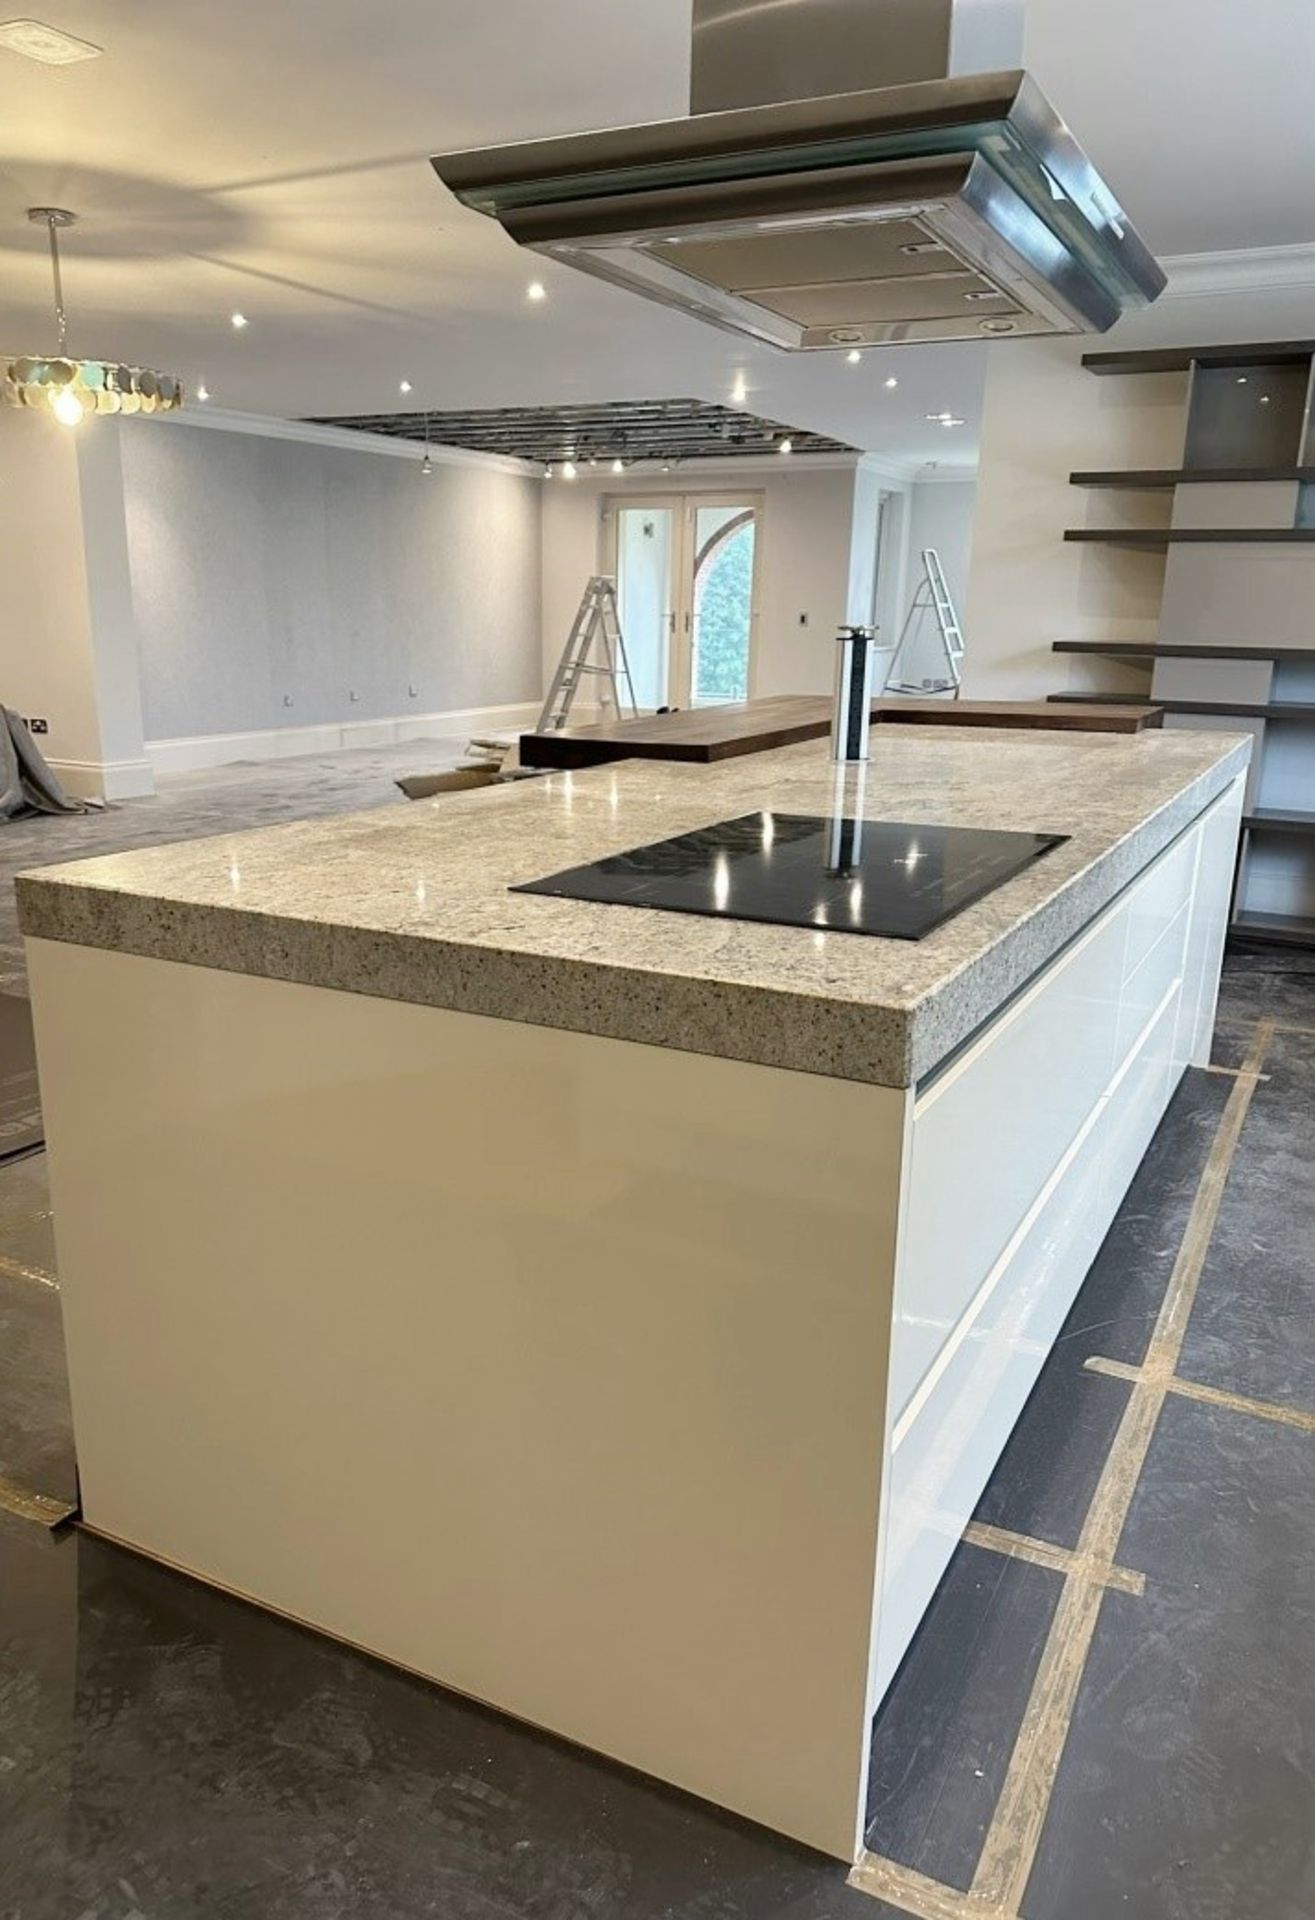 1 x Stunning SIEMATIC Luxury Fitted Handleless Kitchen With Marble Worktops - Original Cost £60,000 - Image 2 of 51